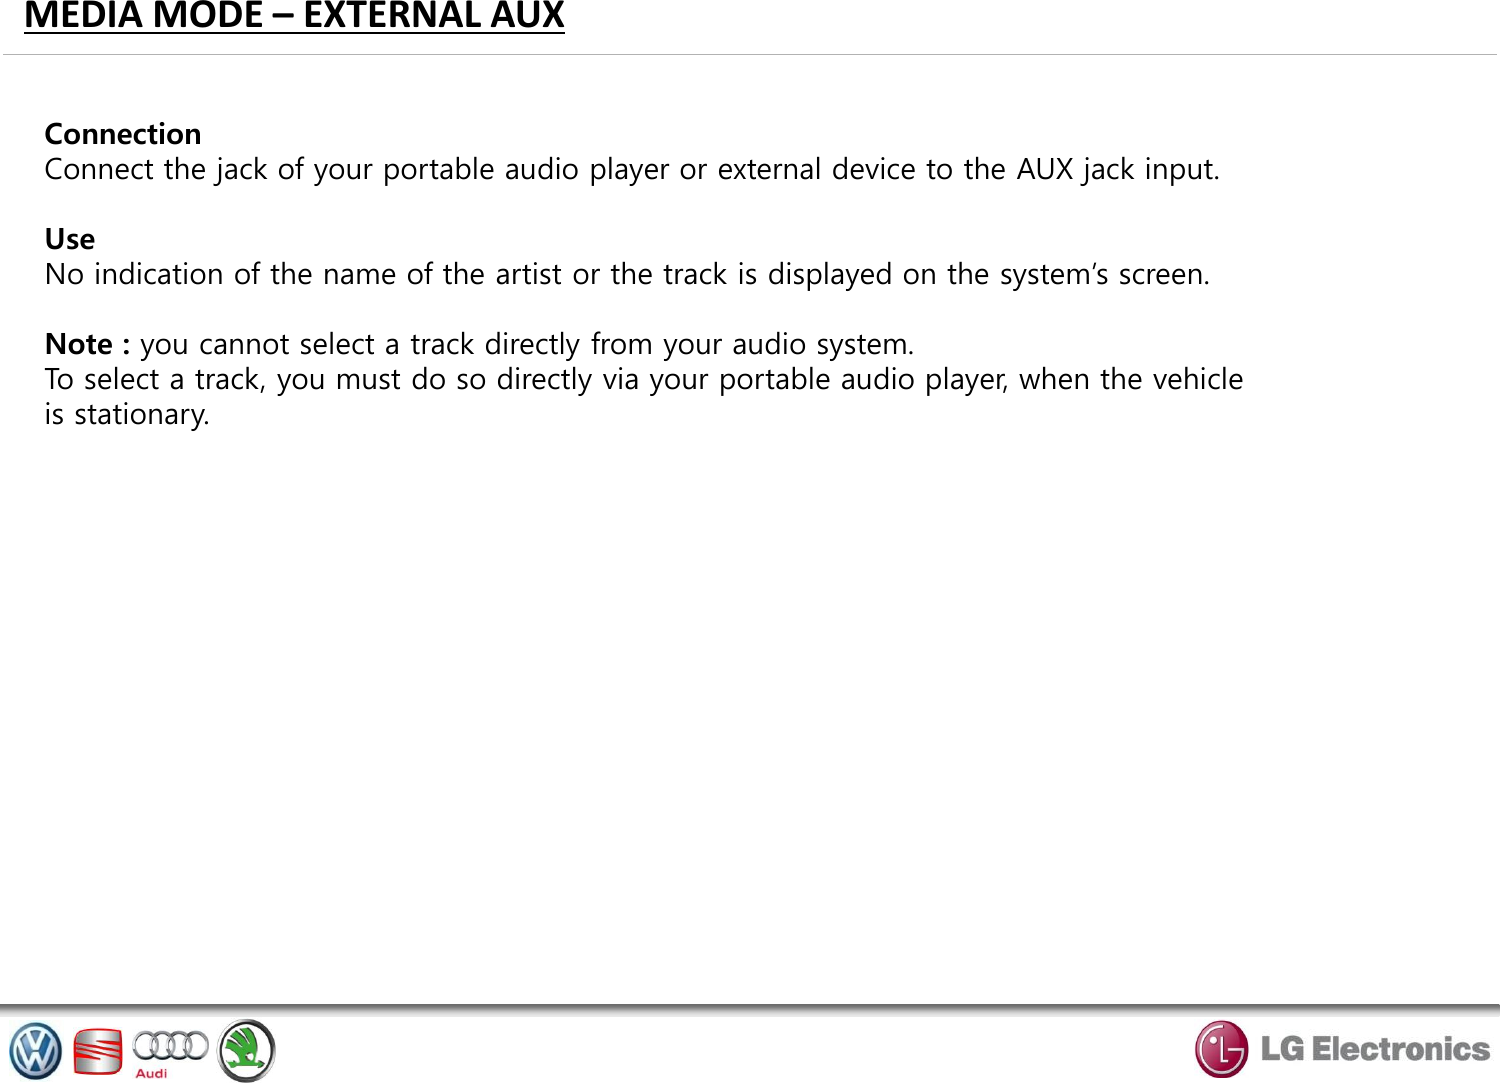 MEDIA MODE – EXTERNAL AUX Connection Connect the jack of your portable audio player or external device to the AUX jack input.  Use No indication of the name of the artist or the track is displayed on the system’s screen.  Note : you cannot select a track directly from your audio system. To select a track, you must do so directly via your portable audio player, when the vehicle is stationary. 